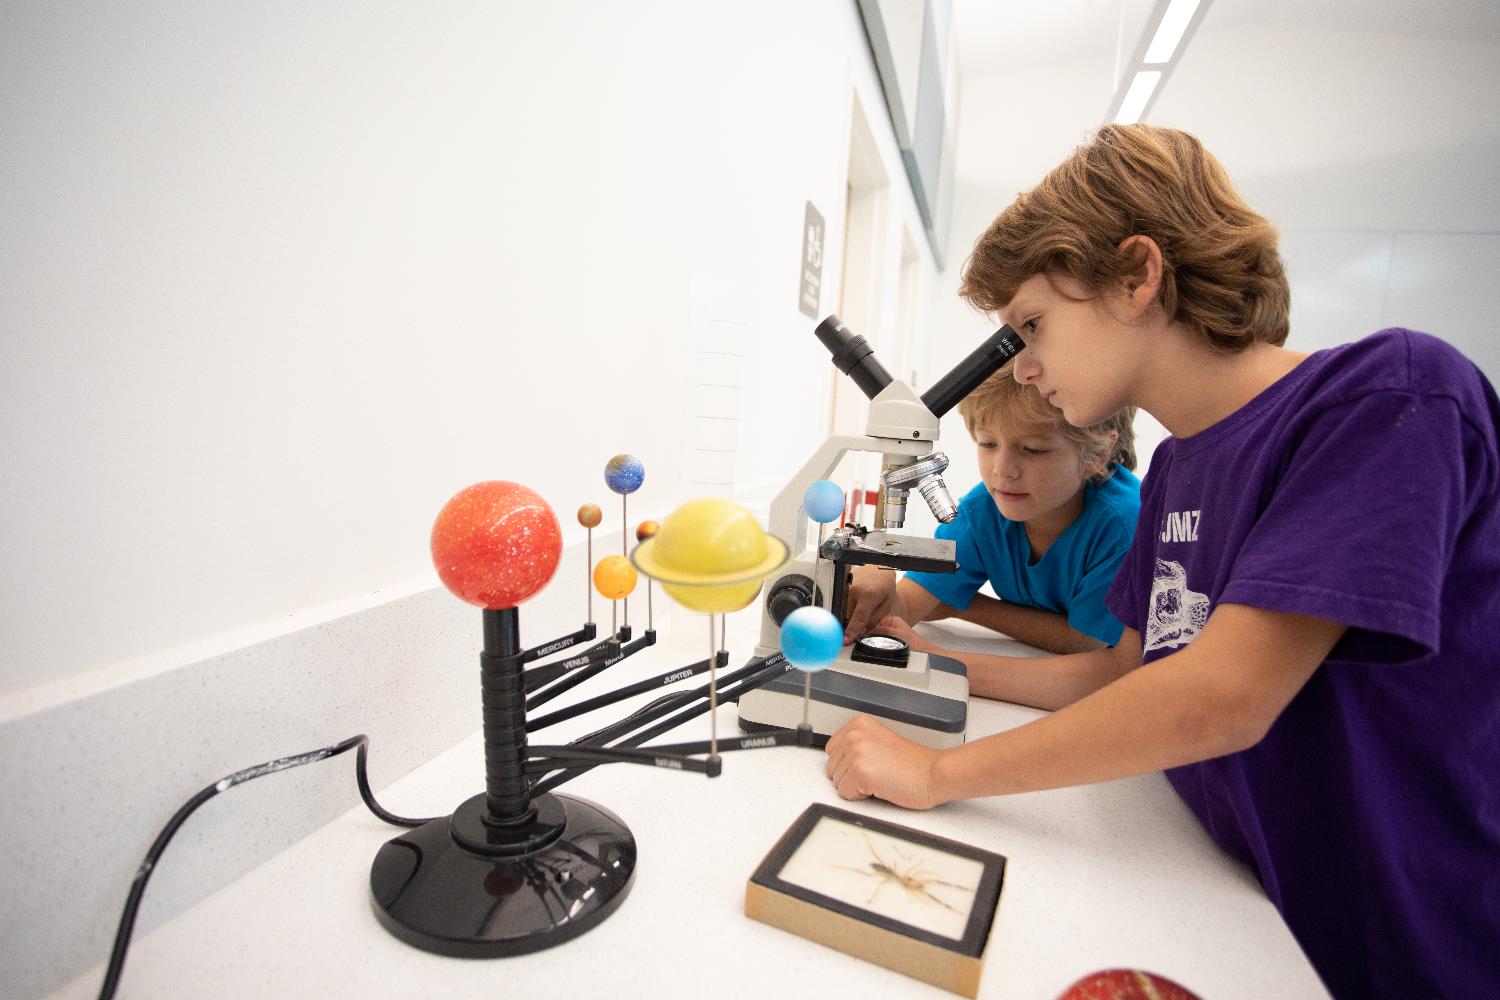 Two children look into a microscope to examine an insect specimen